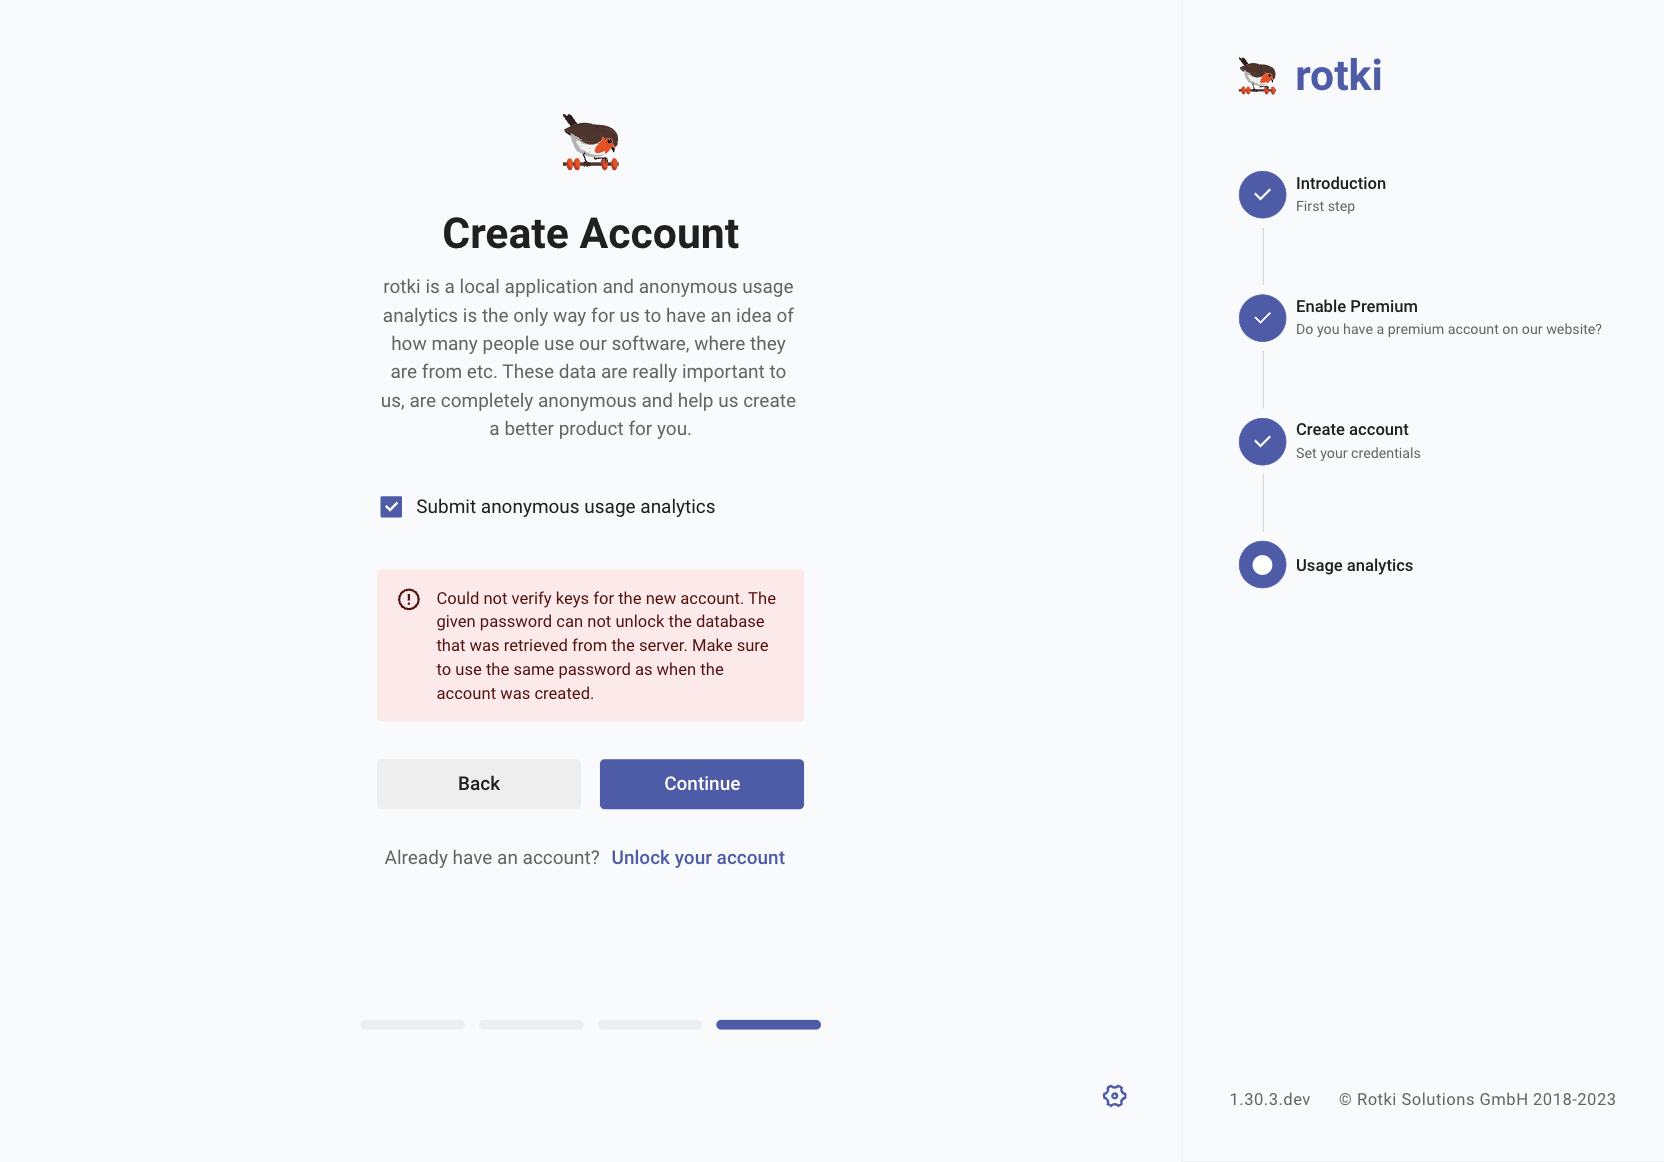 Sign-up with existing premium subscription using a wrong password